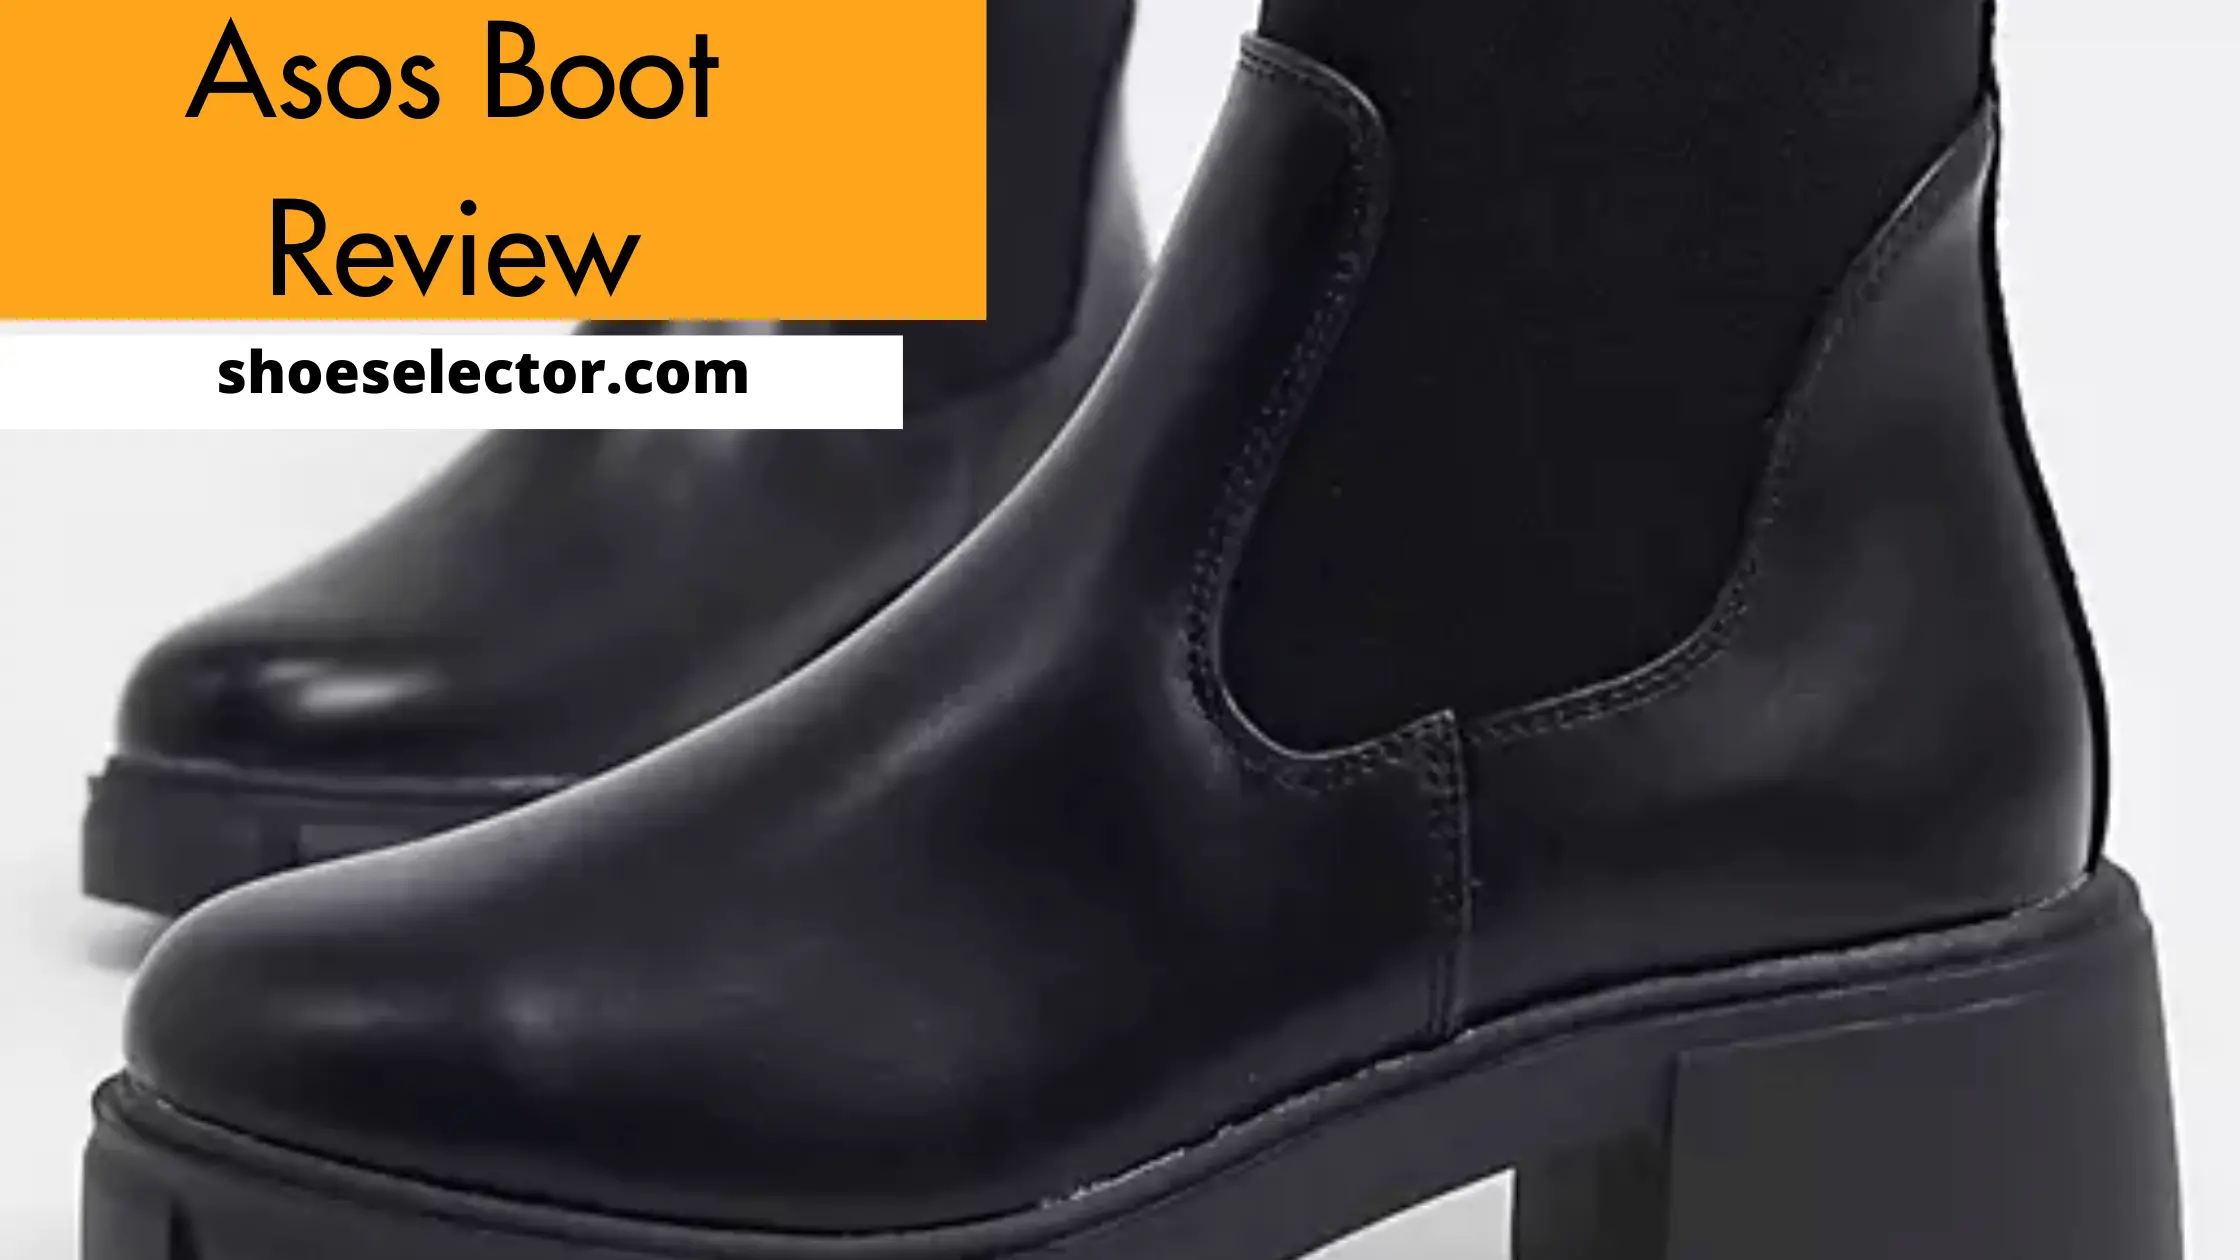 Asos Boot Review With Buying Guides